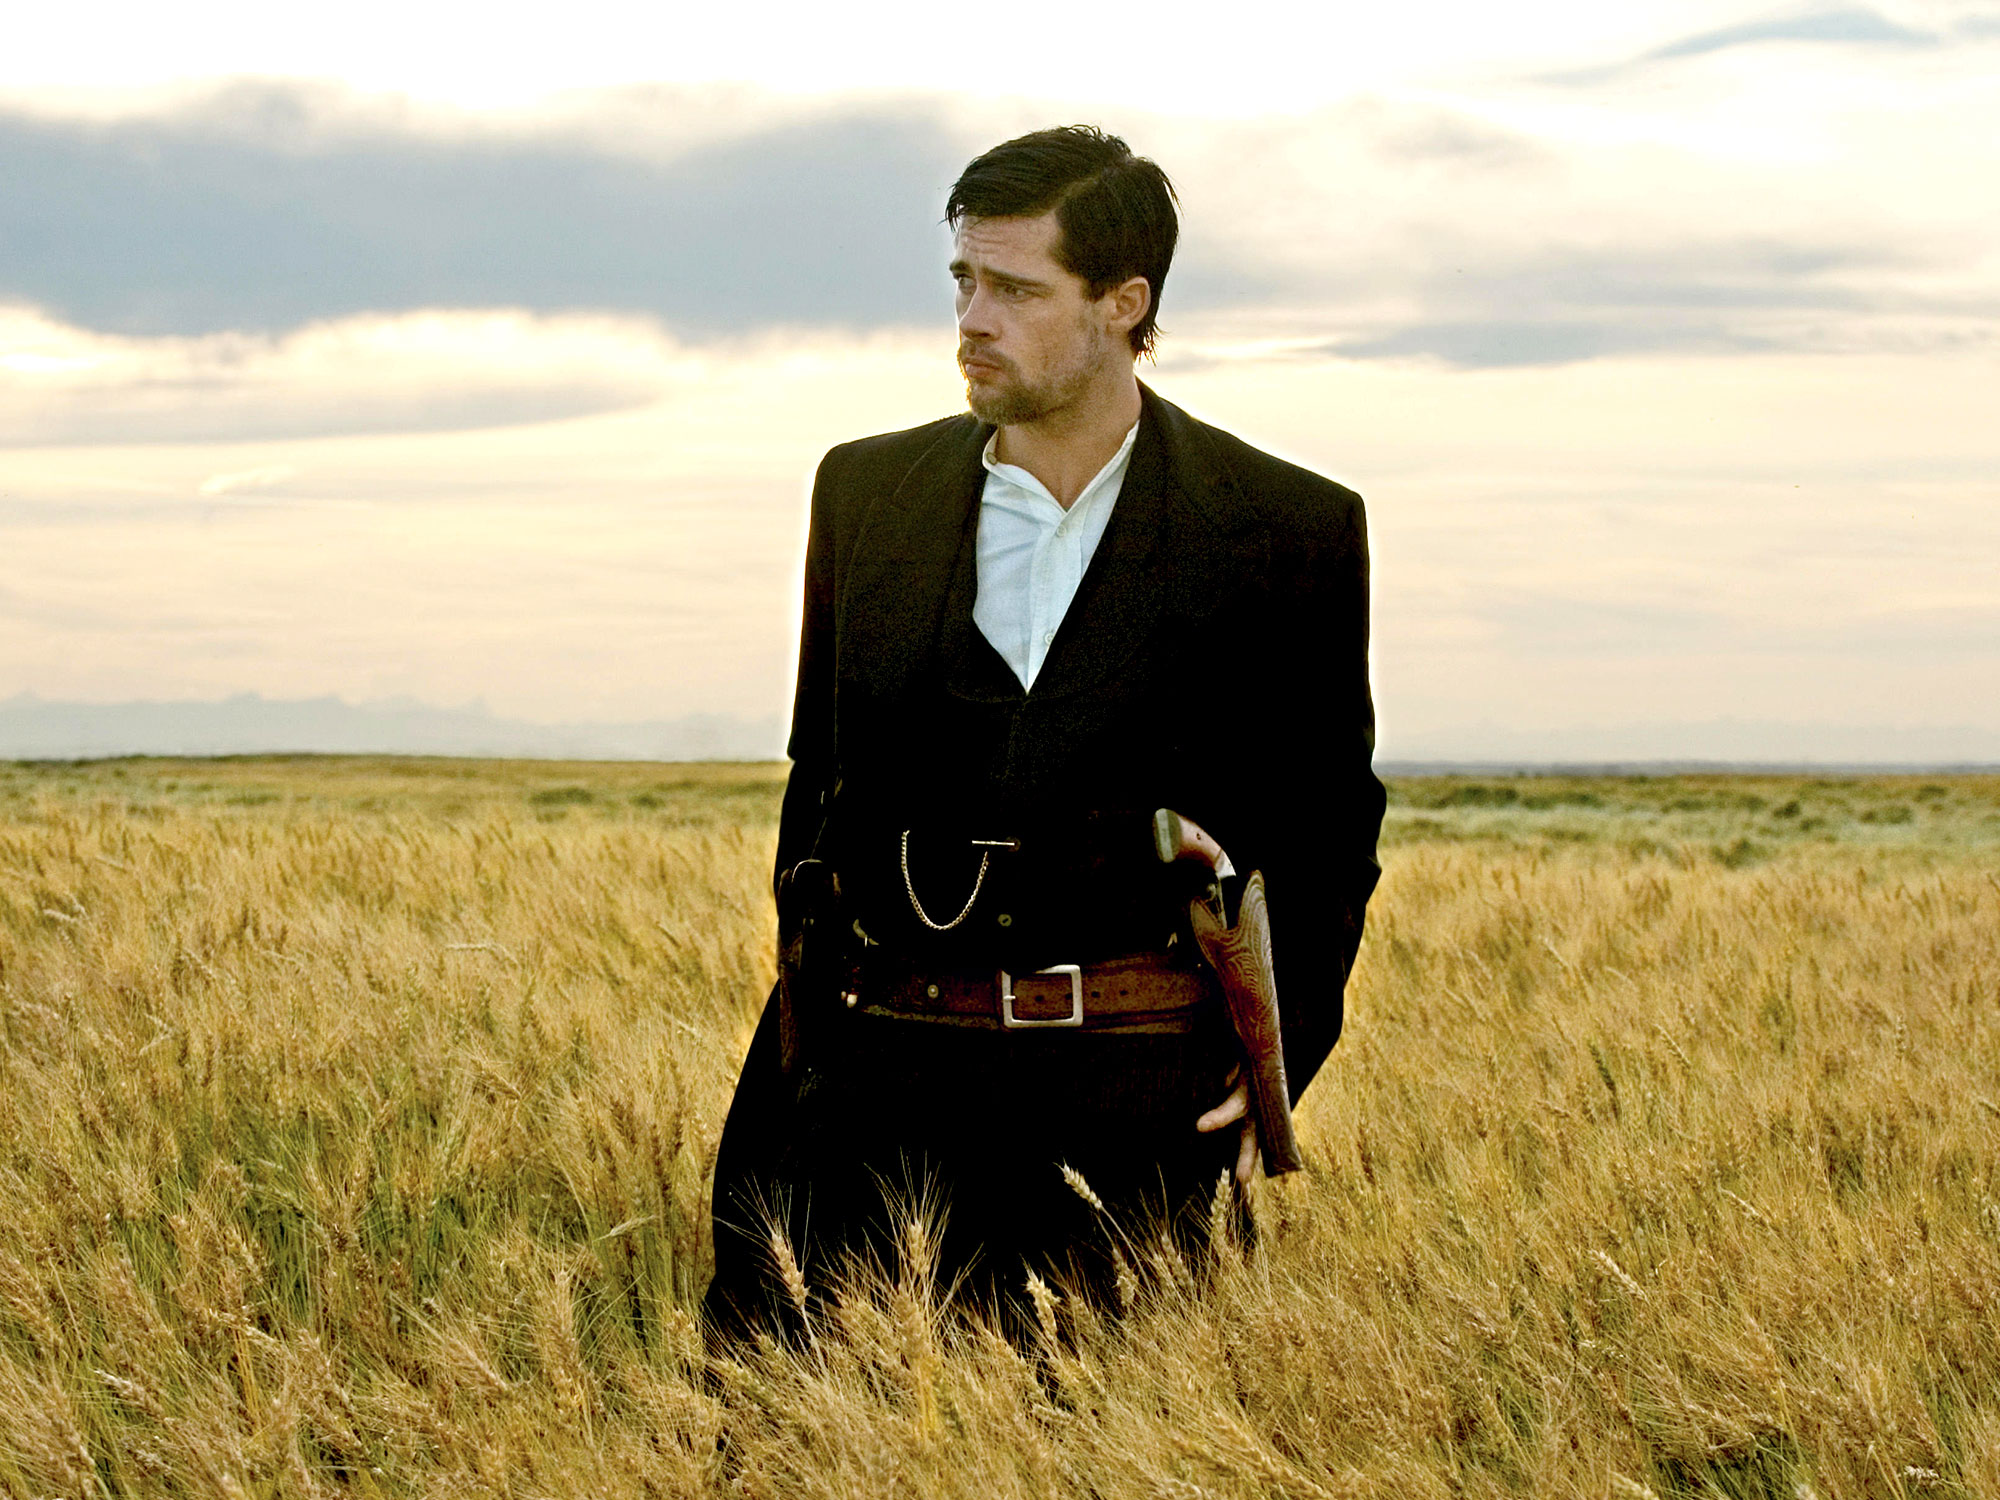 Why The Assassination of Jesse James is a masterful modern western